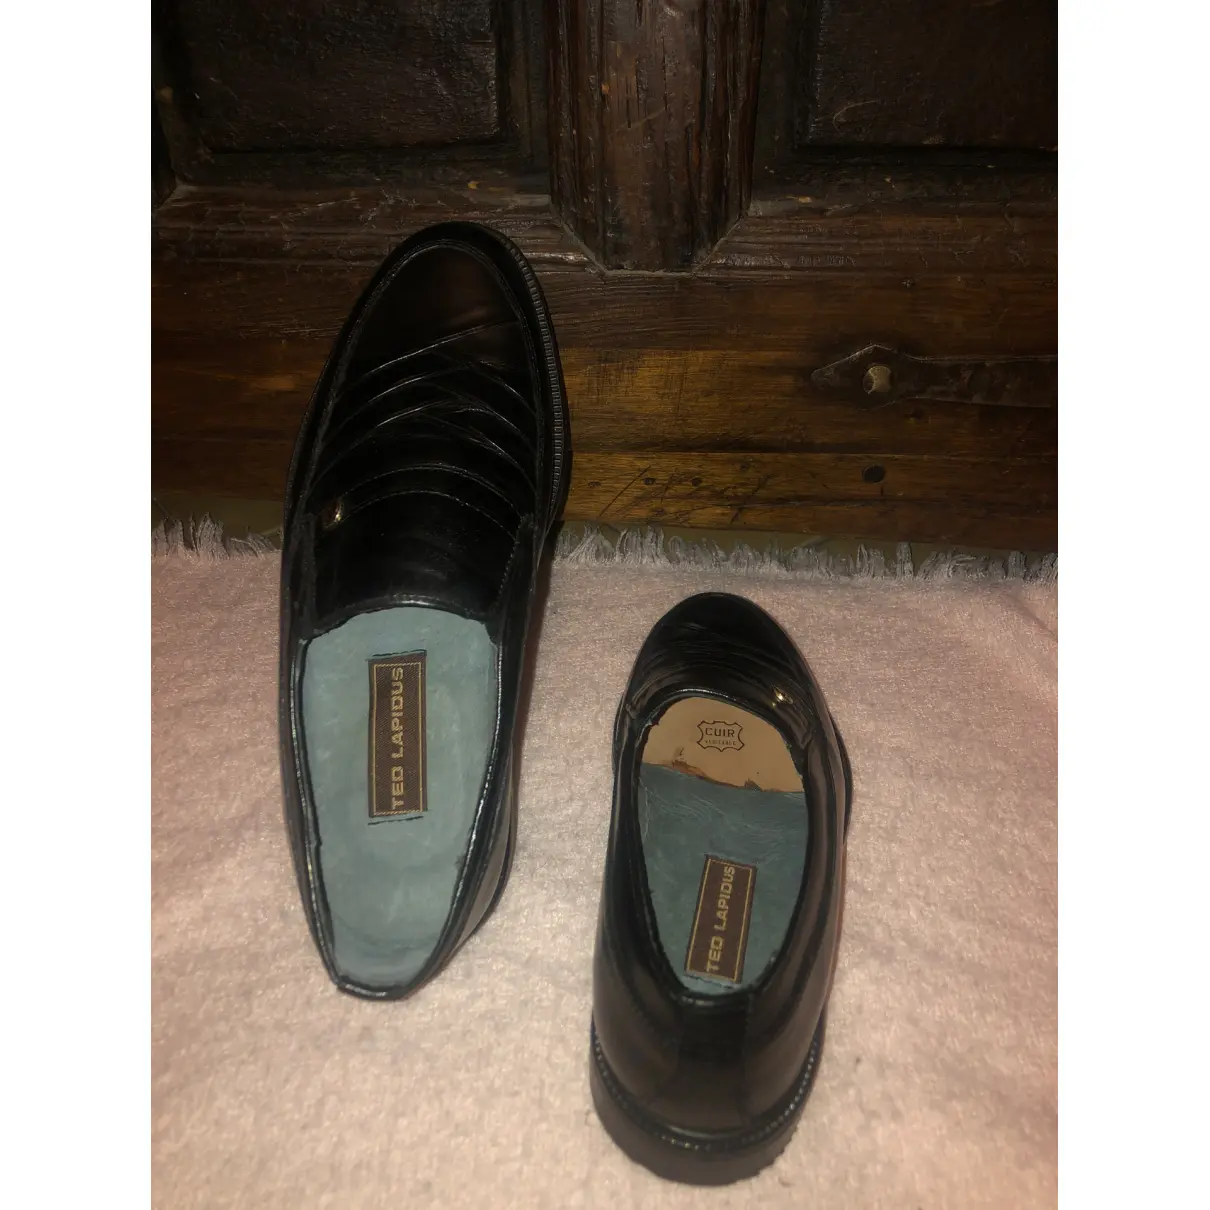 Buy Ted Lapidus Leather flats online